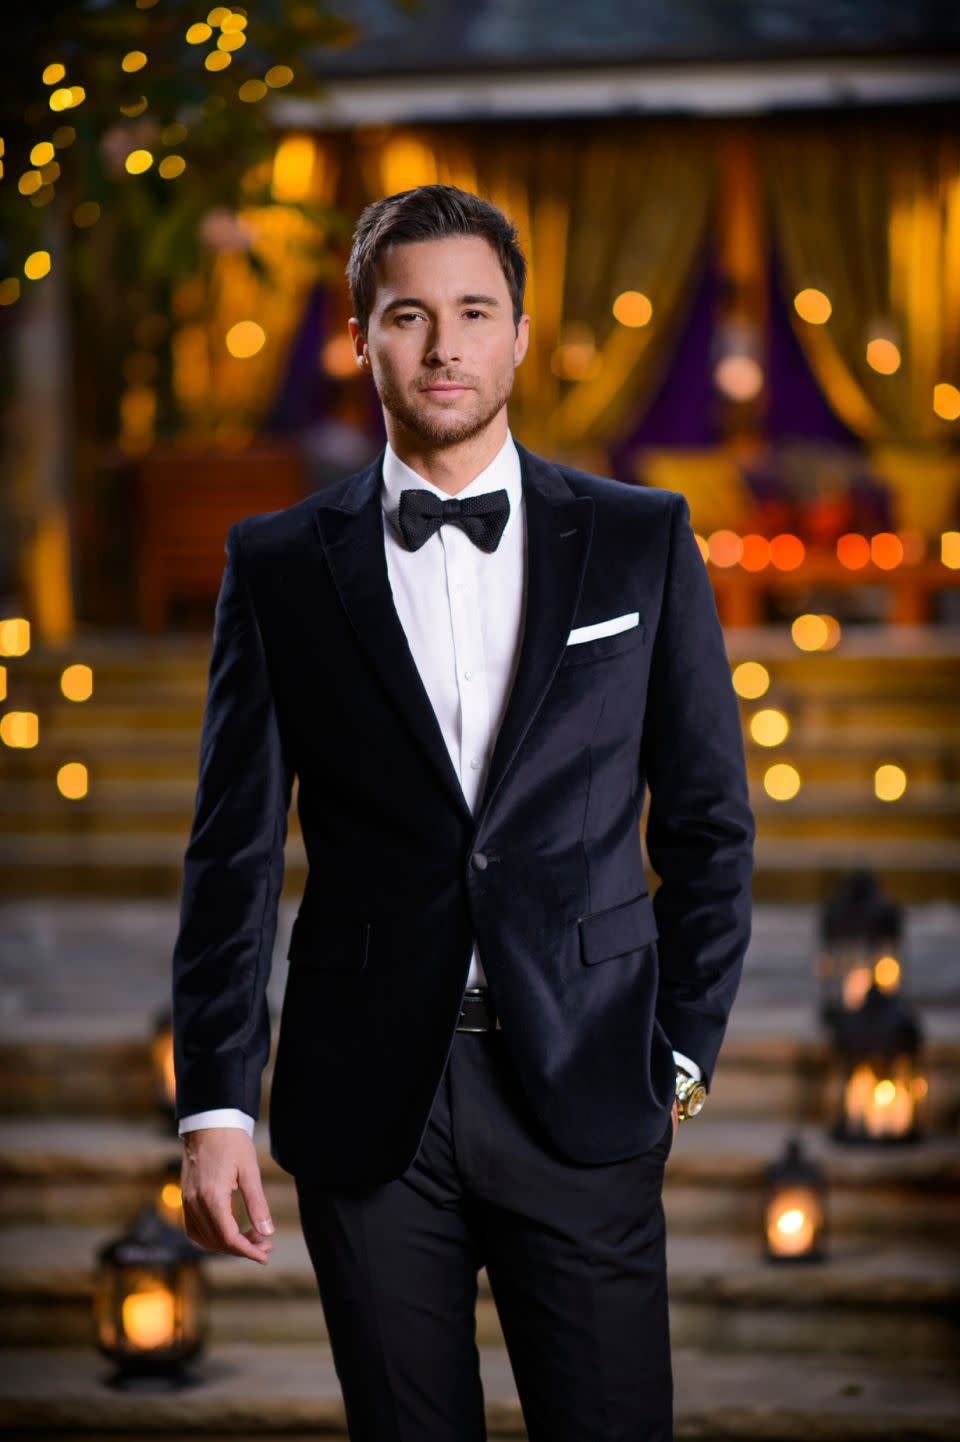 Michael Turnbull has admitted him being the next Bachelor is 